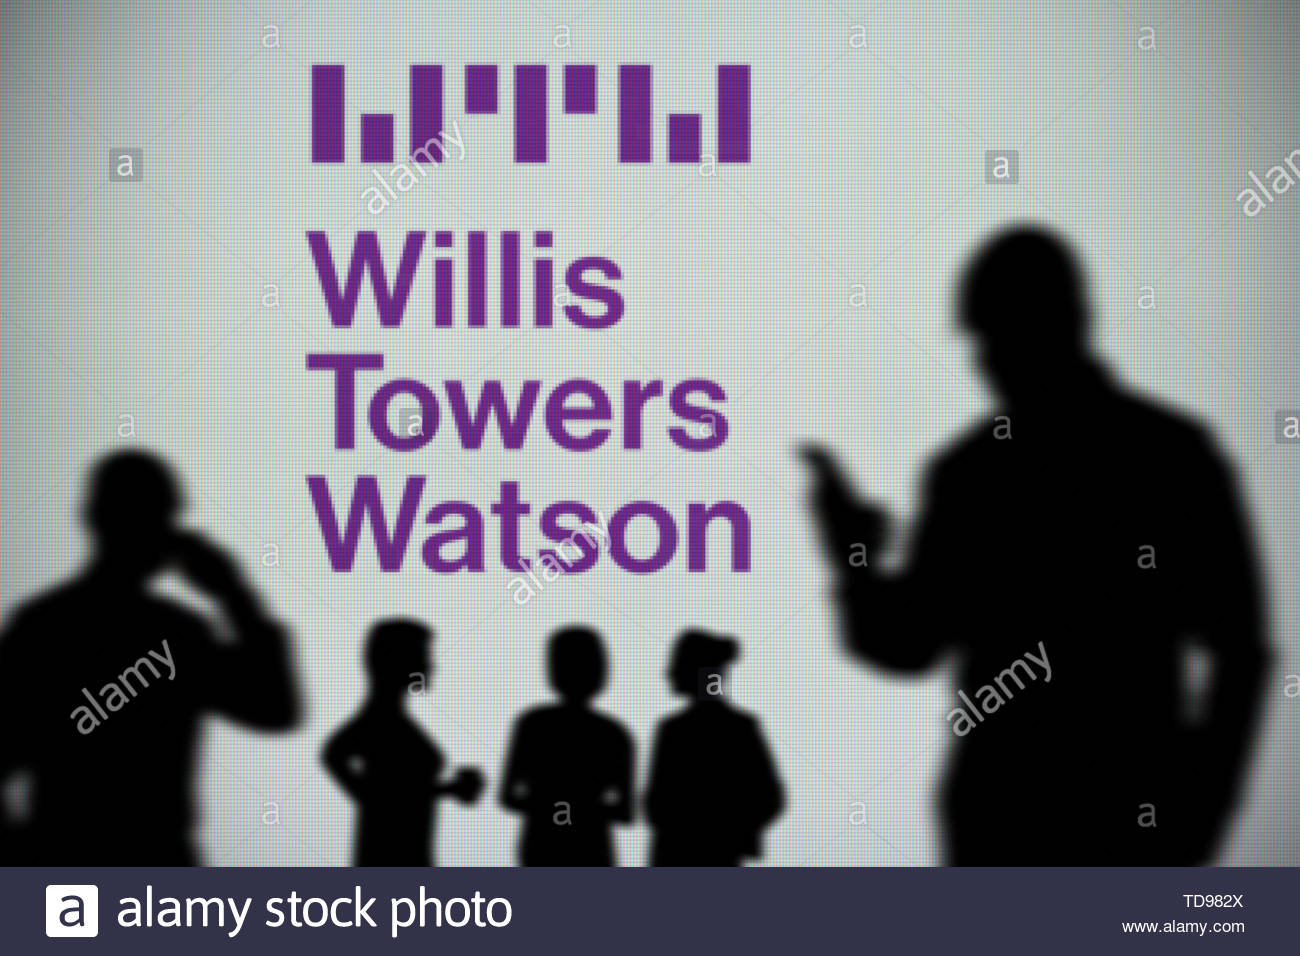 The Willis Towers Watson logo is seen on an LED screen in the